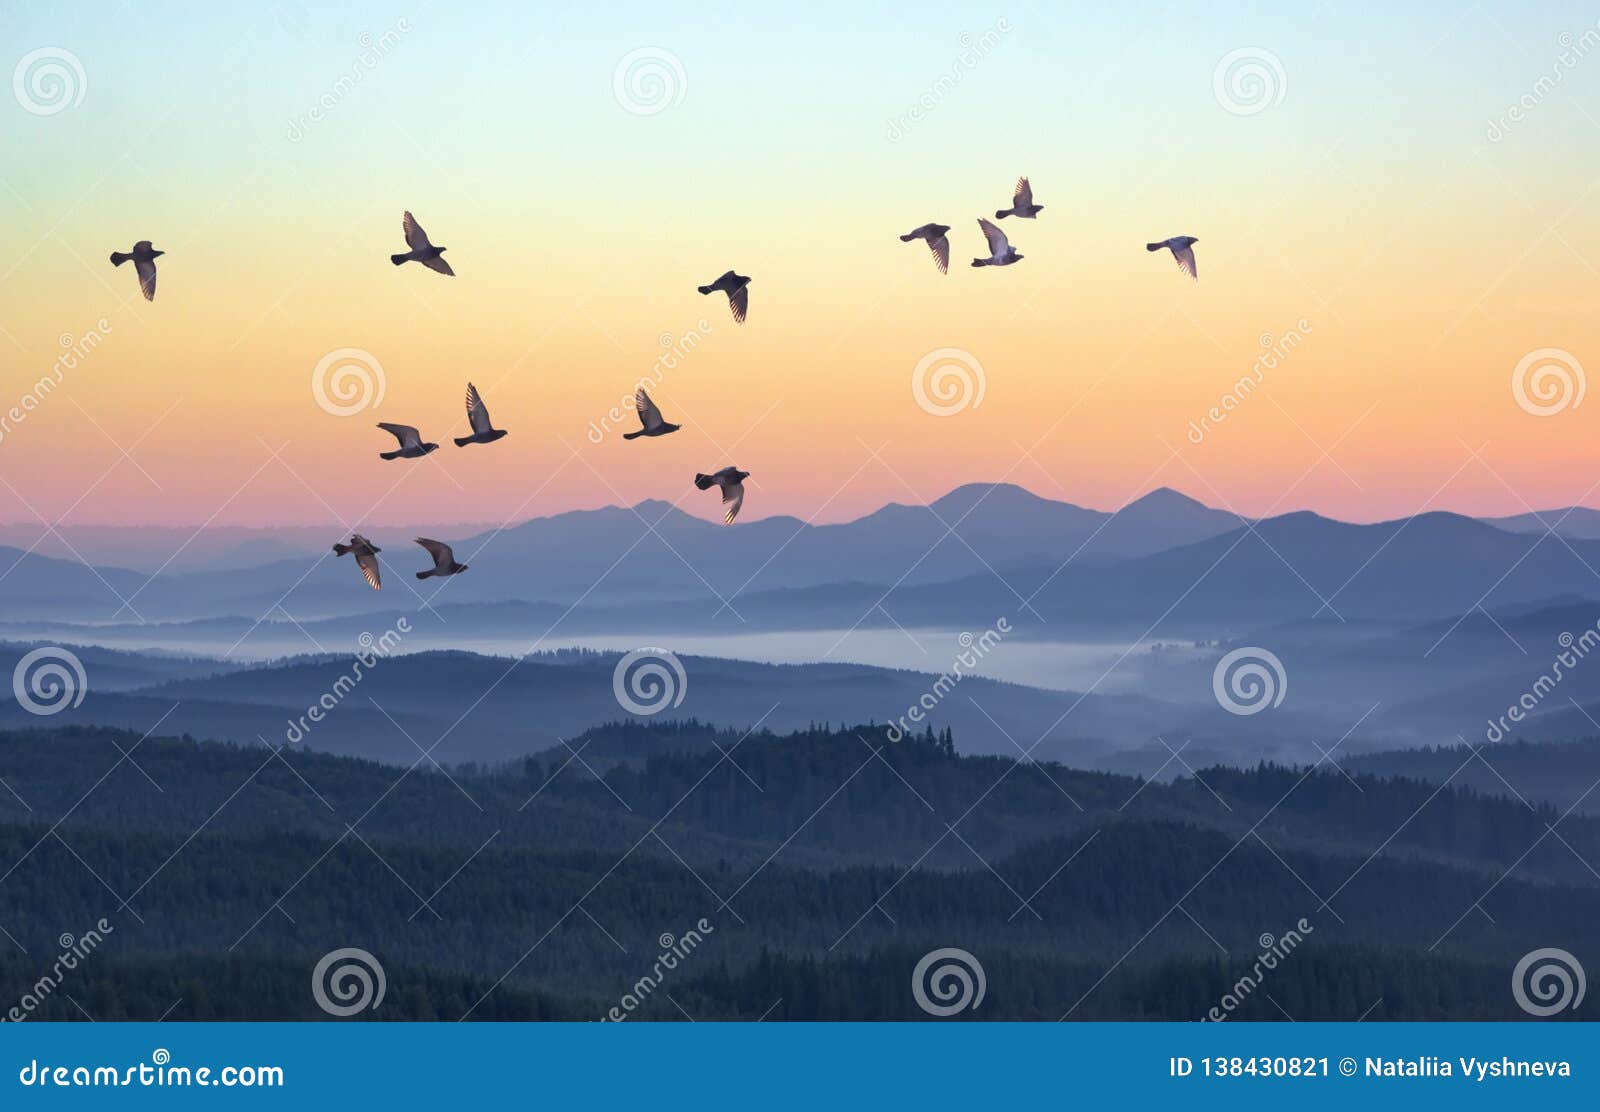 foggy morning in the mountains with flying birds over silhouettes of hills. serenity sunrise with soft sunlight and layers of haze